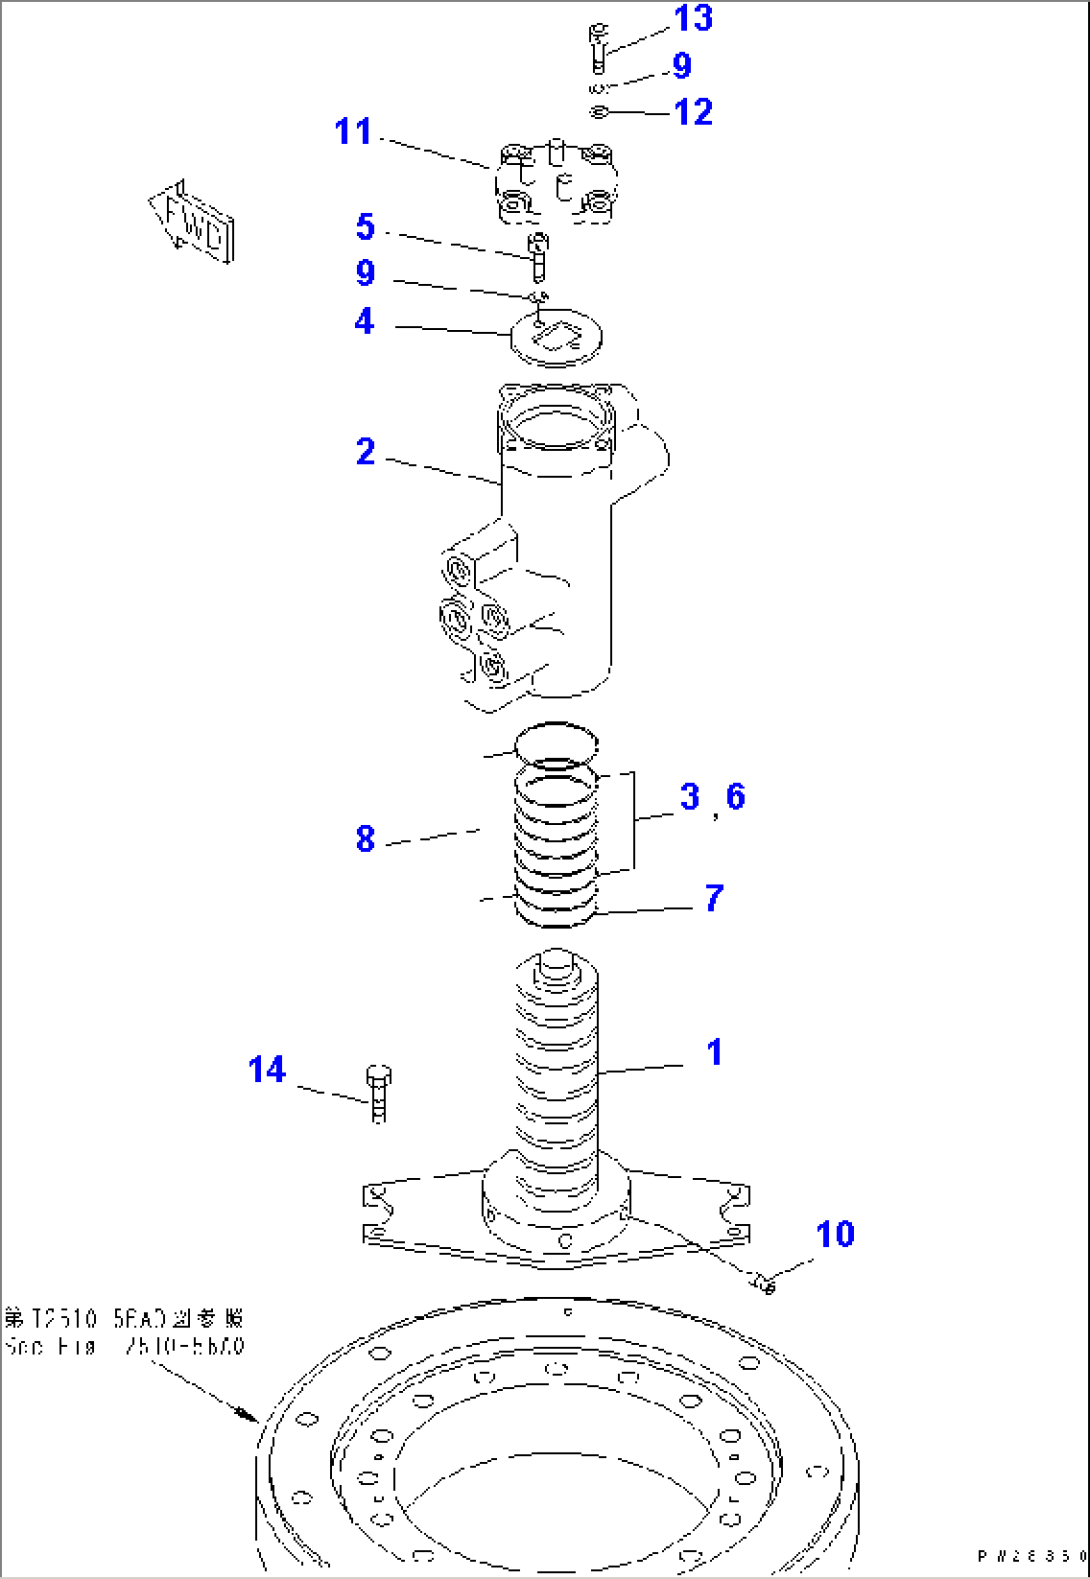 ROTARY JOINT(#1001-1500)